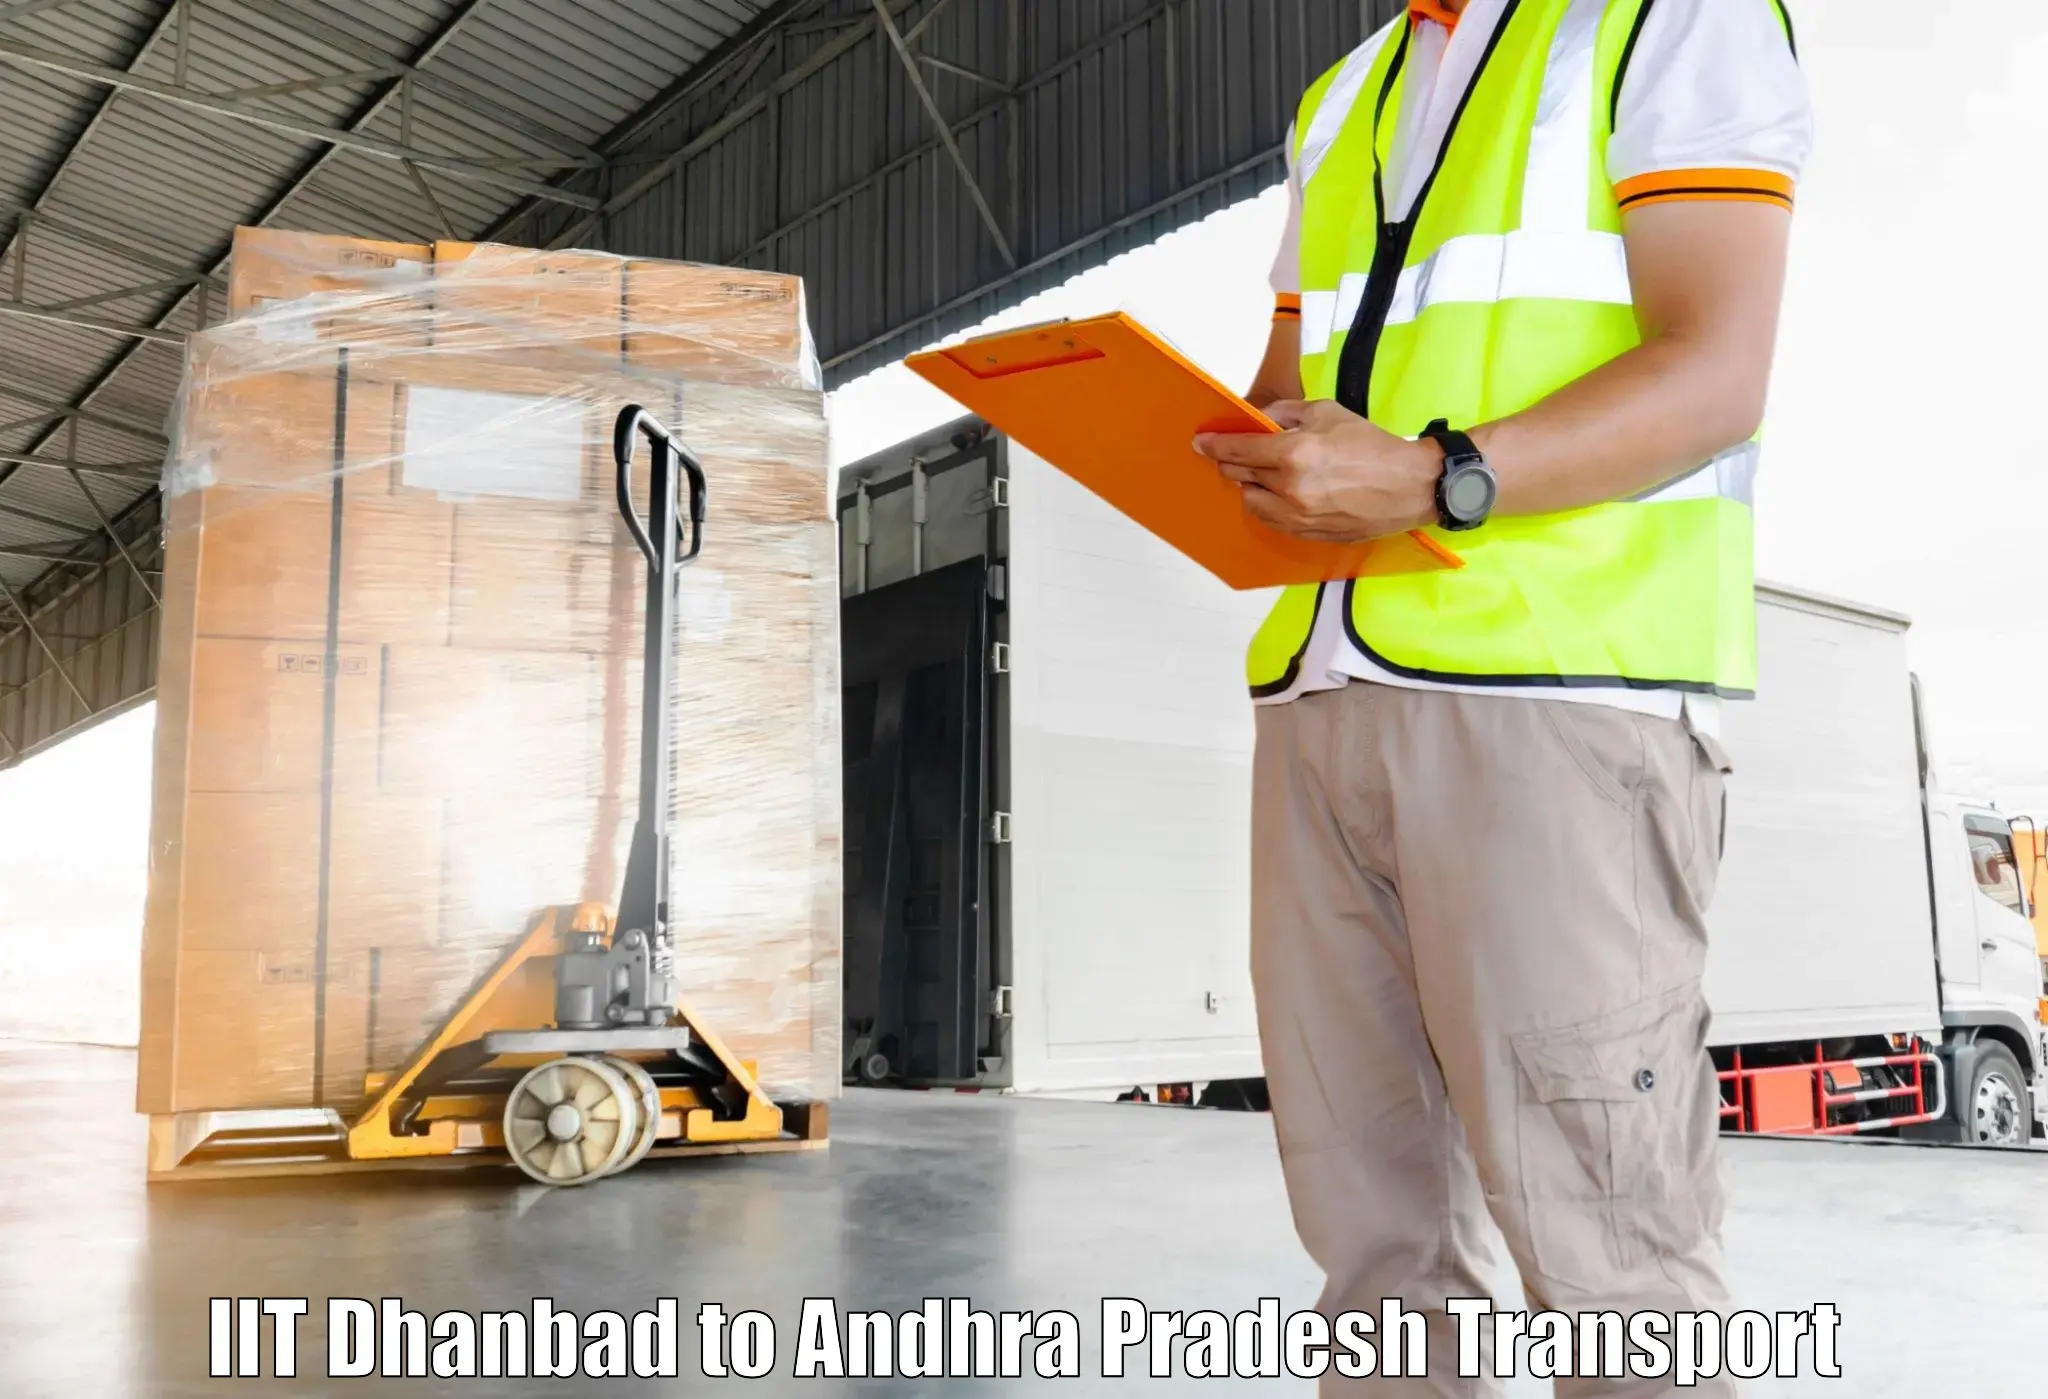 Commercial transport service IIT Dhanbad to Kudair